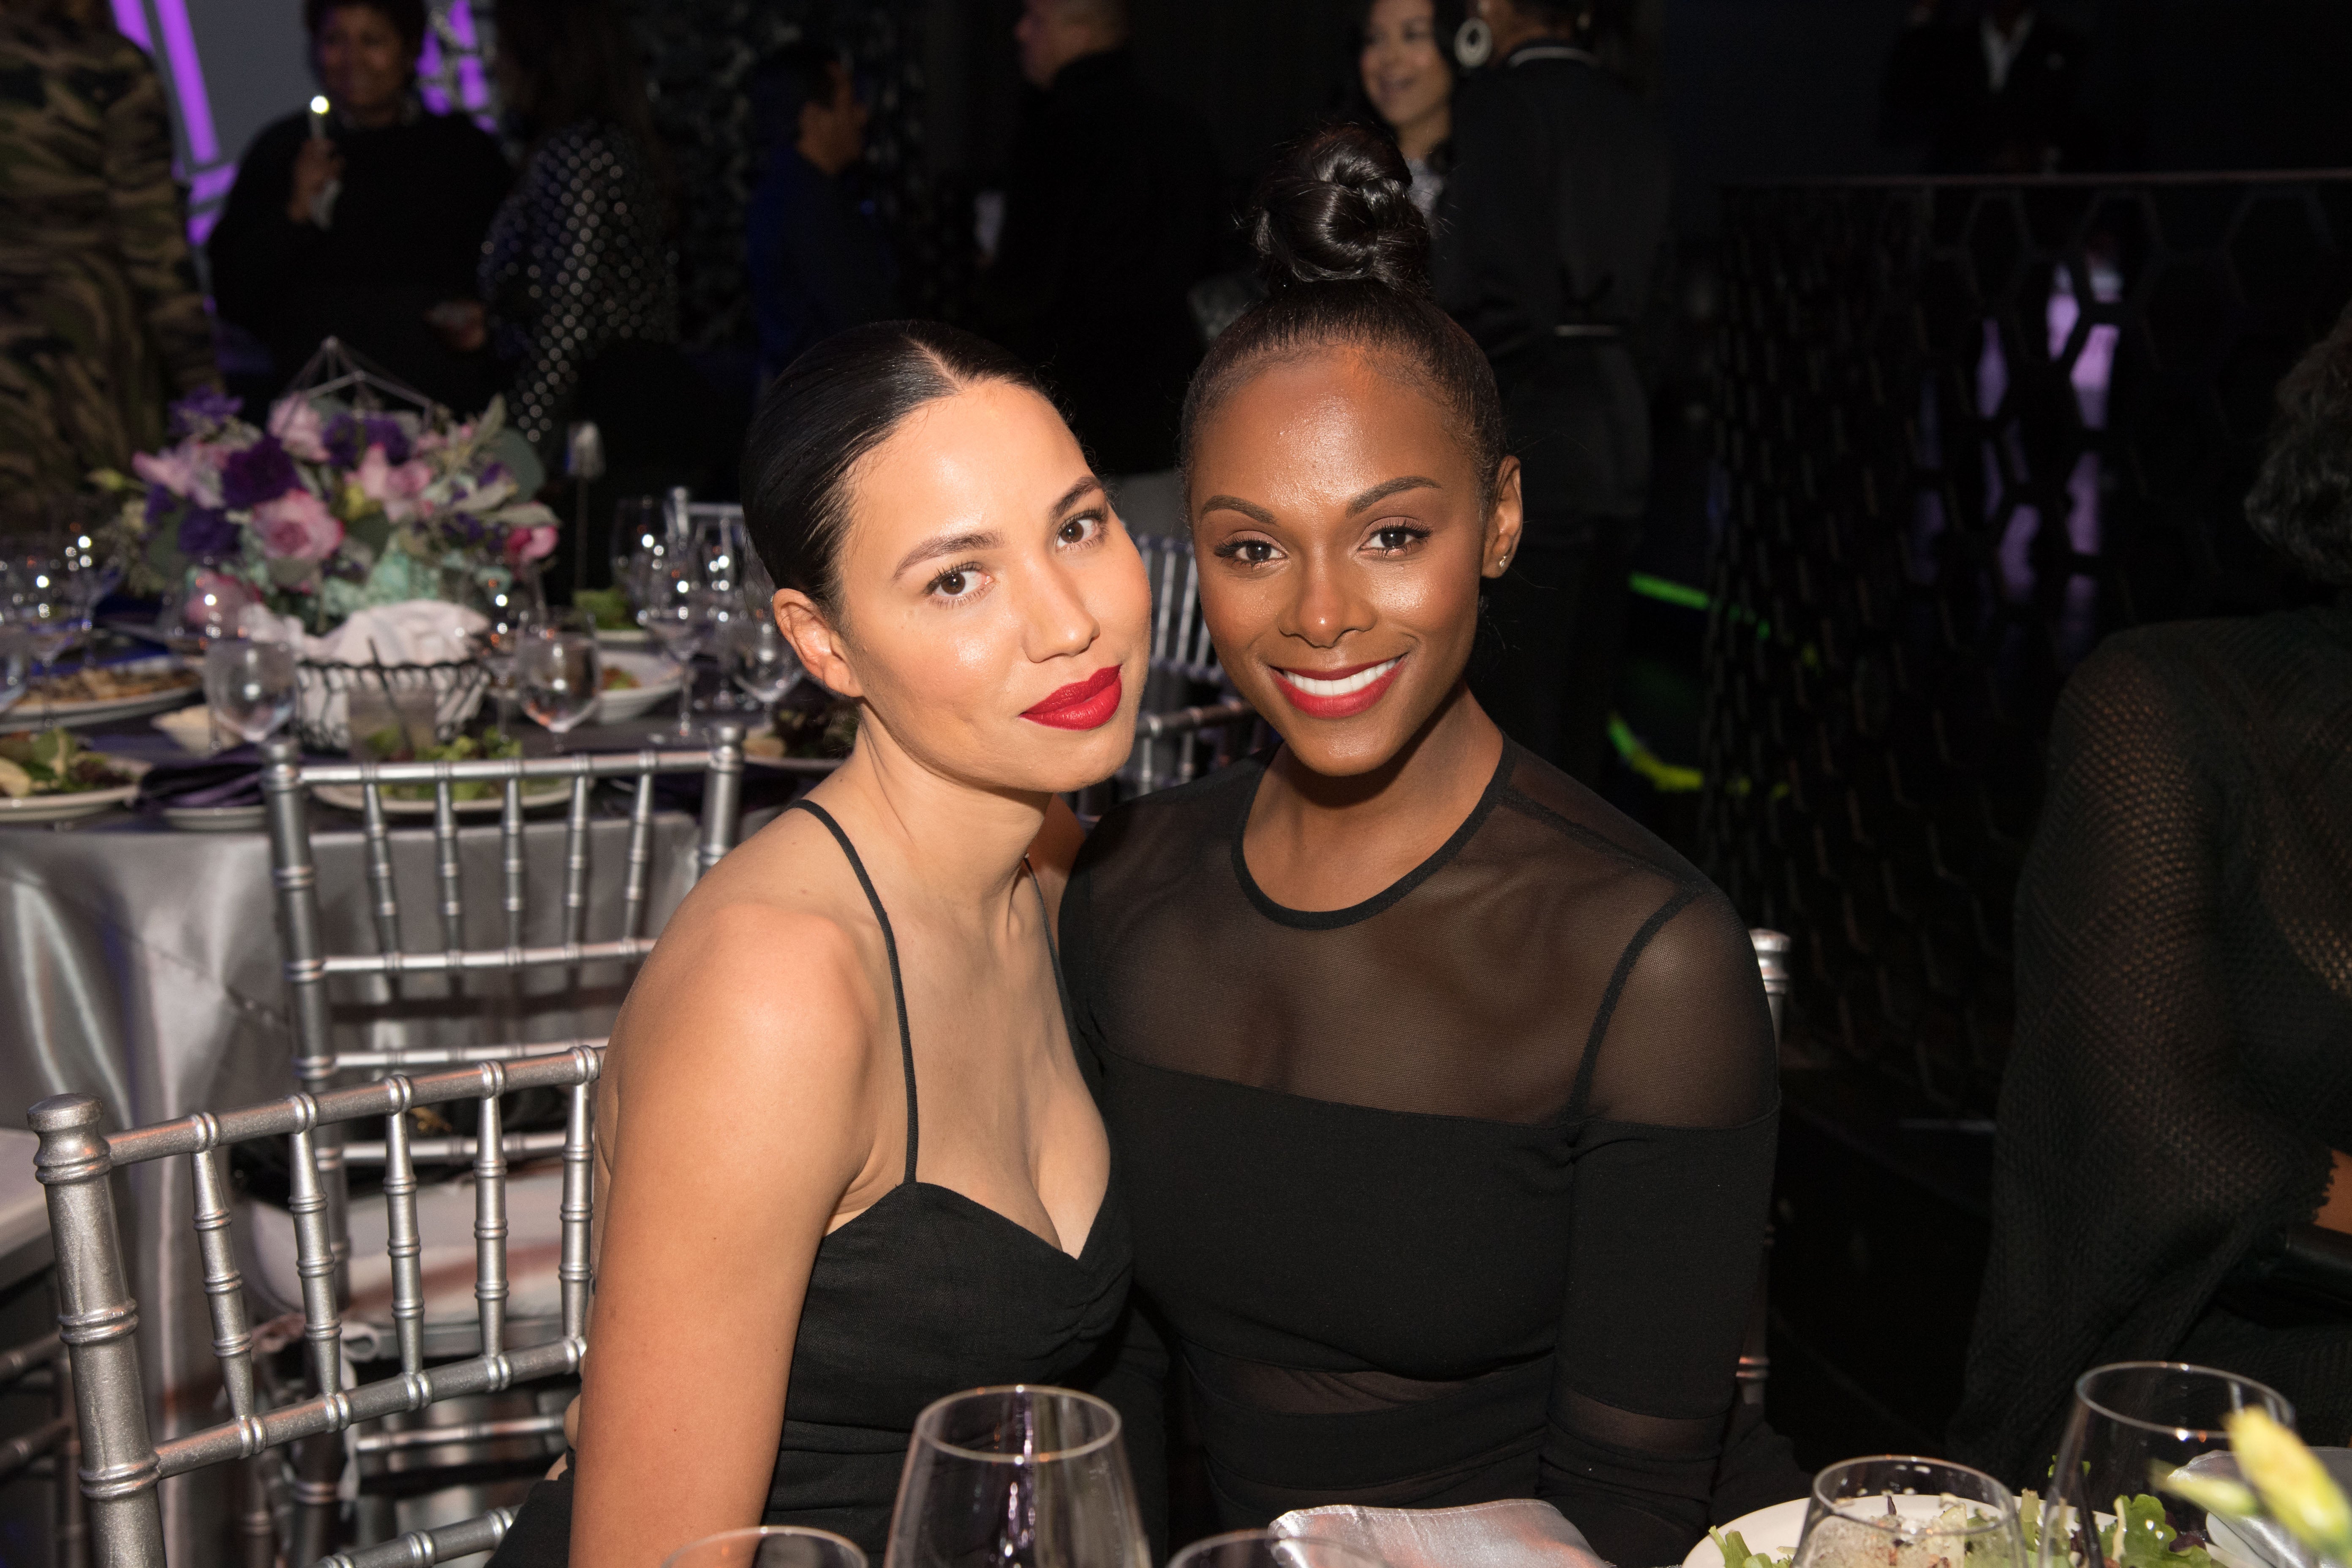 Danai Gurira, Ava DuVernay, Angela Bassett and More Celebs Out and About
